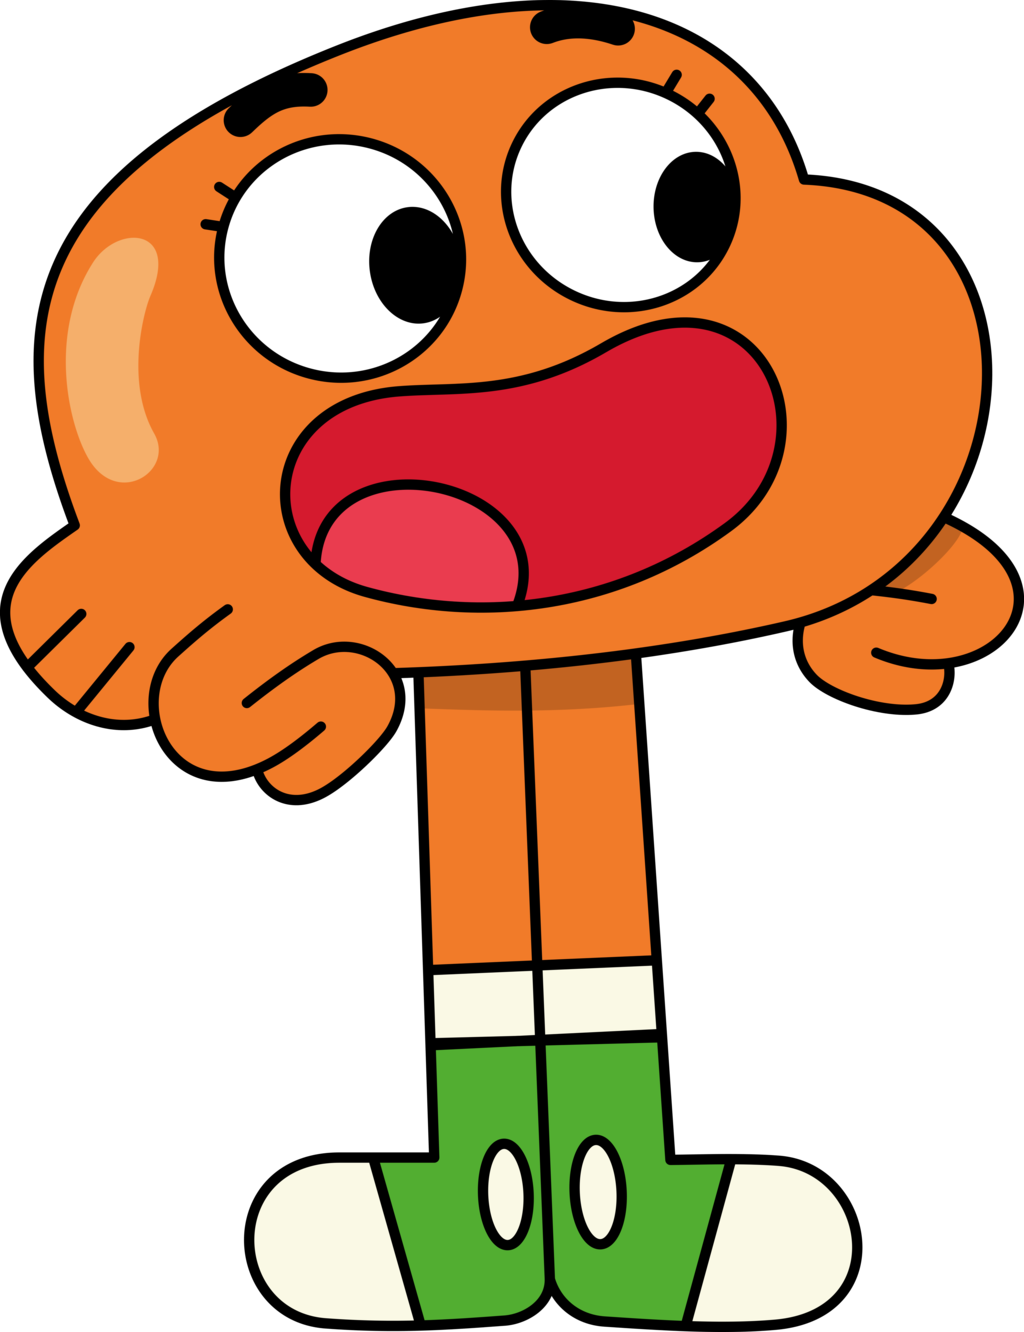 Download and share clipart about Gumball Clipart Cartoon - Darwin Incrível ...